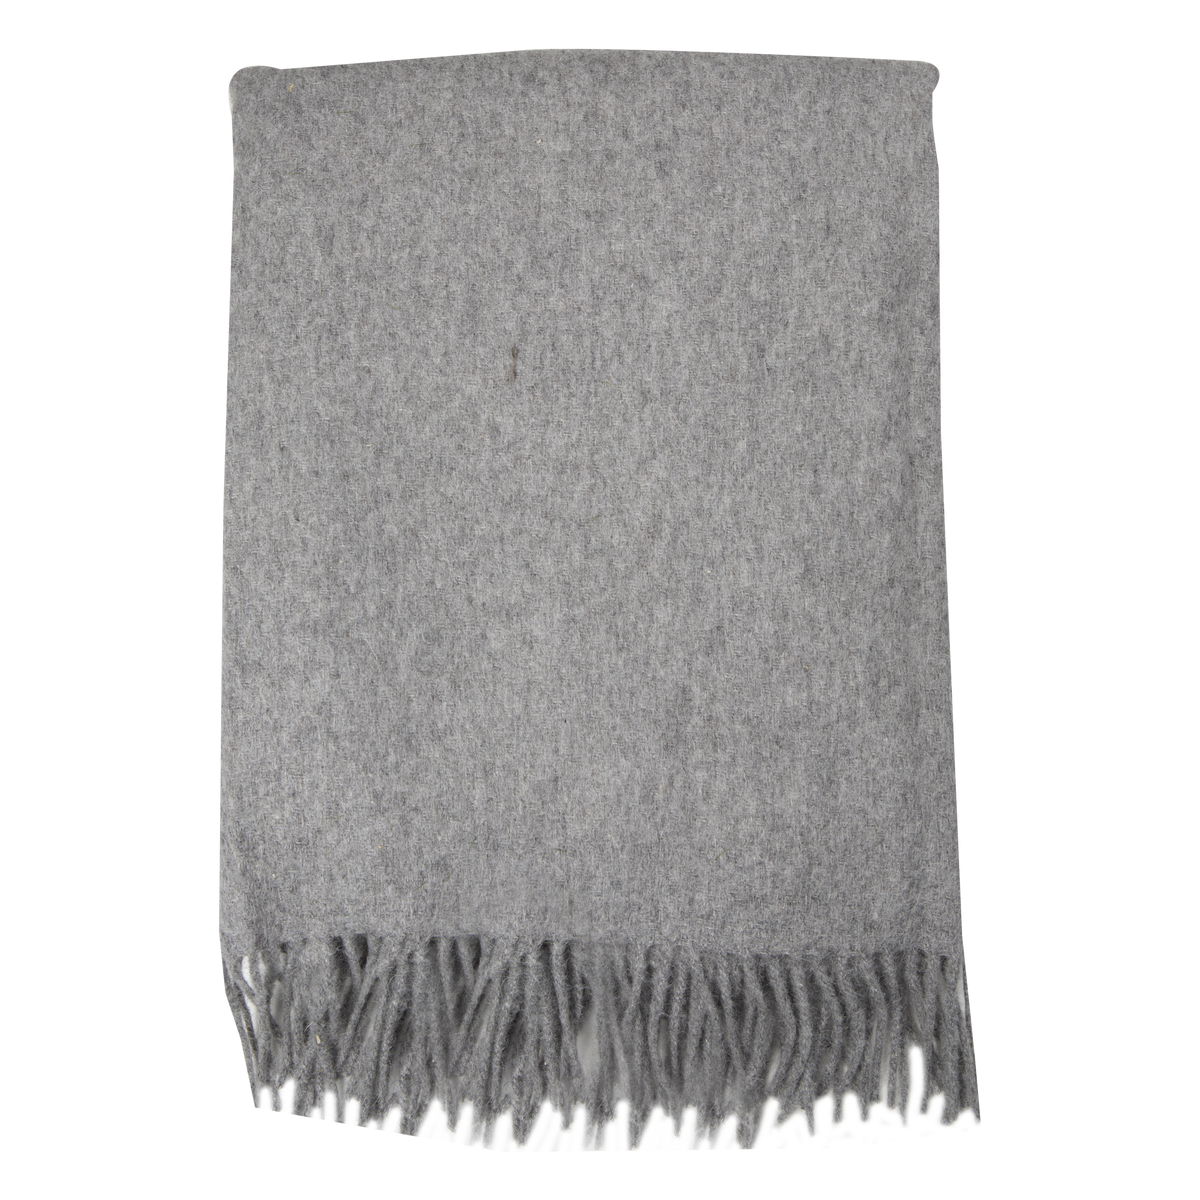 Luxurious and desirable, the Solid Alpaca/Lambswool Throw in light greyfeatures an exquisitely soft fabric that is made from a blend of alpaca and lambswool fibre.